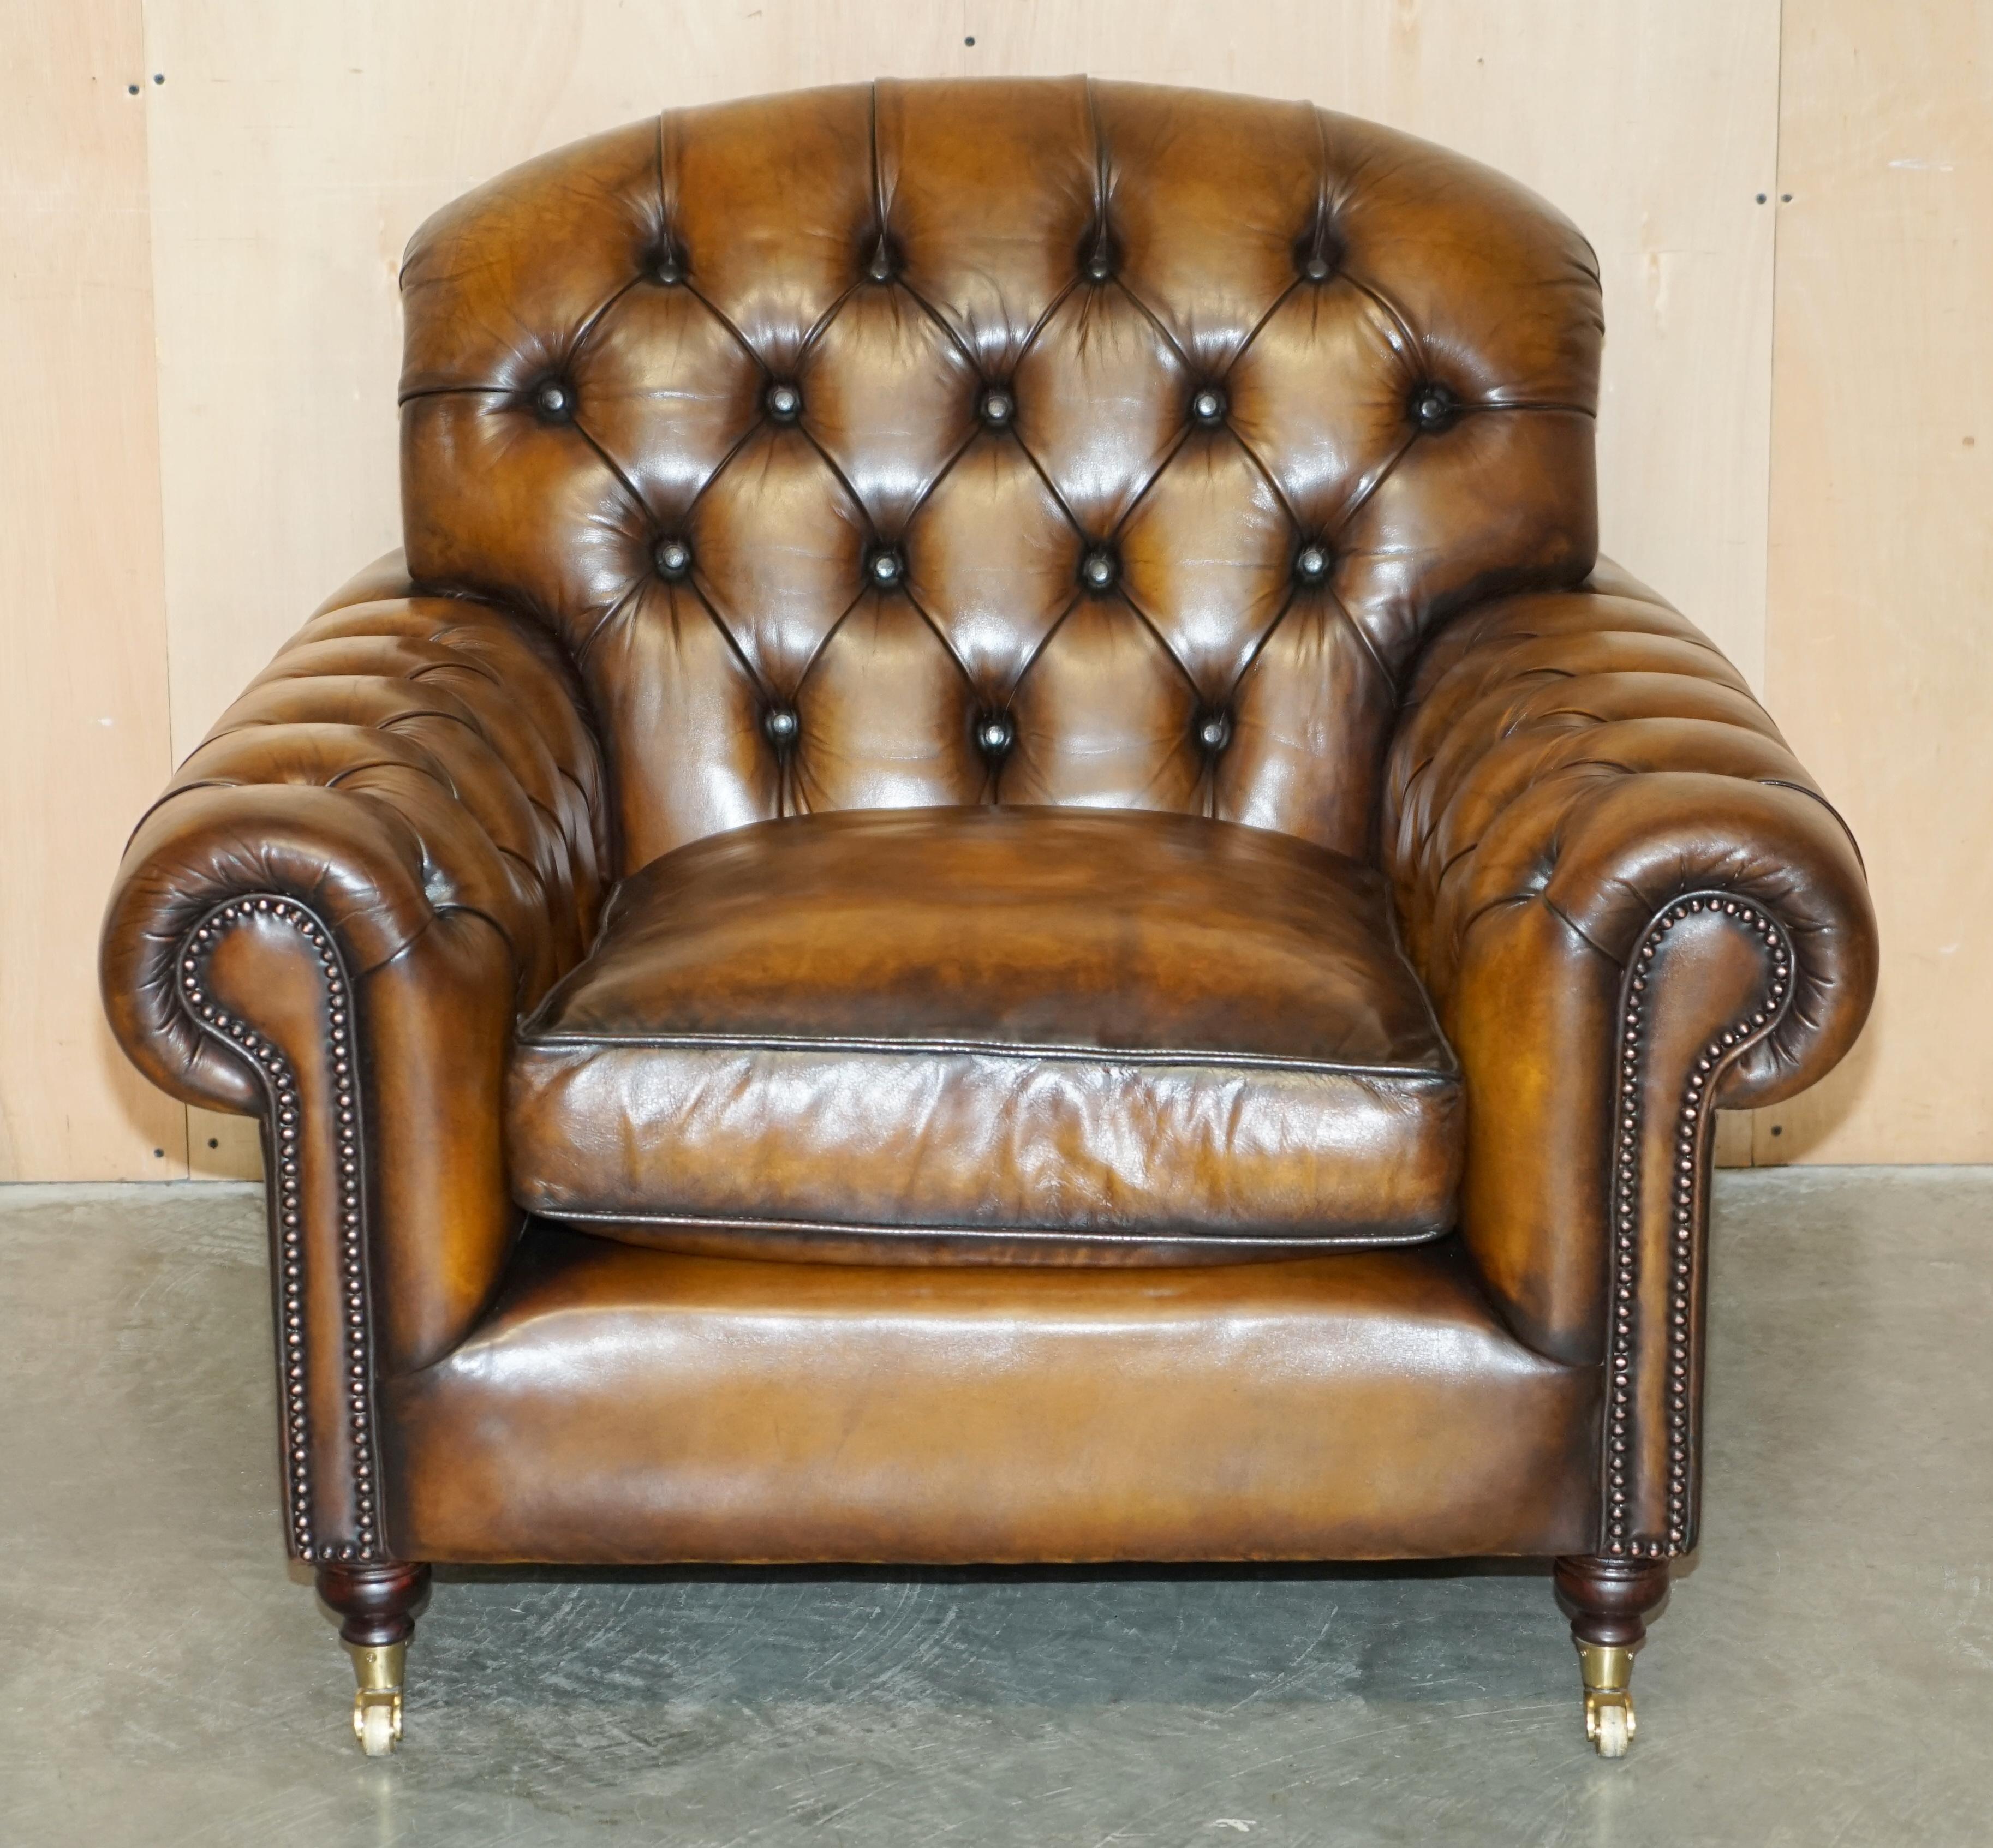 English PAIR OF FULLY RESTORED GEORGE SMiTH BULGARU BROWN LEATHER CHESTERFIELD ARMCHAIRS For Sale